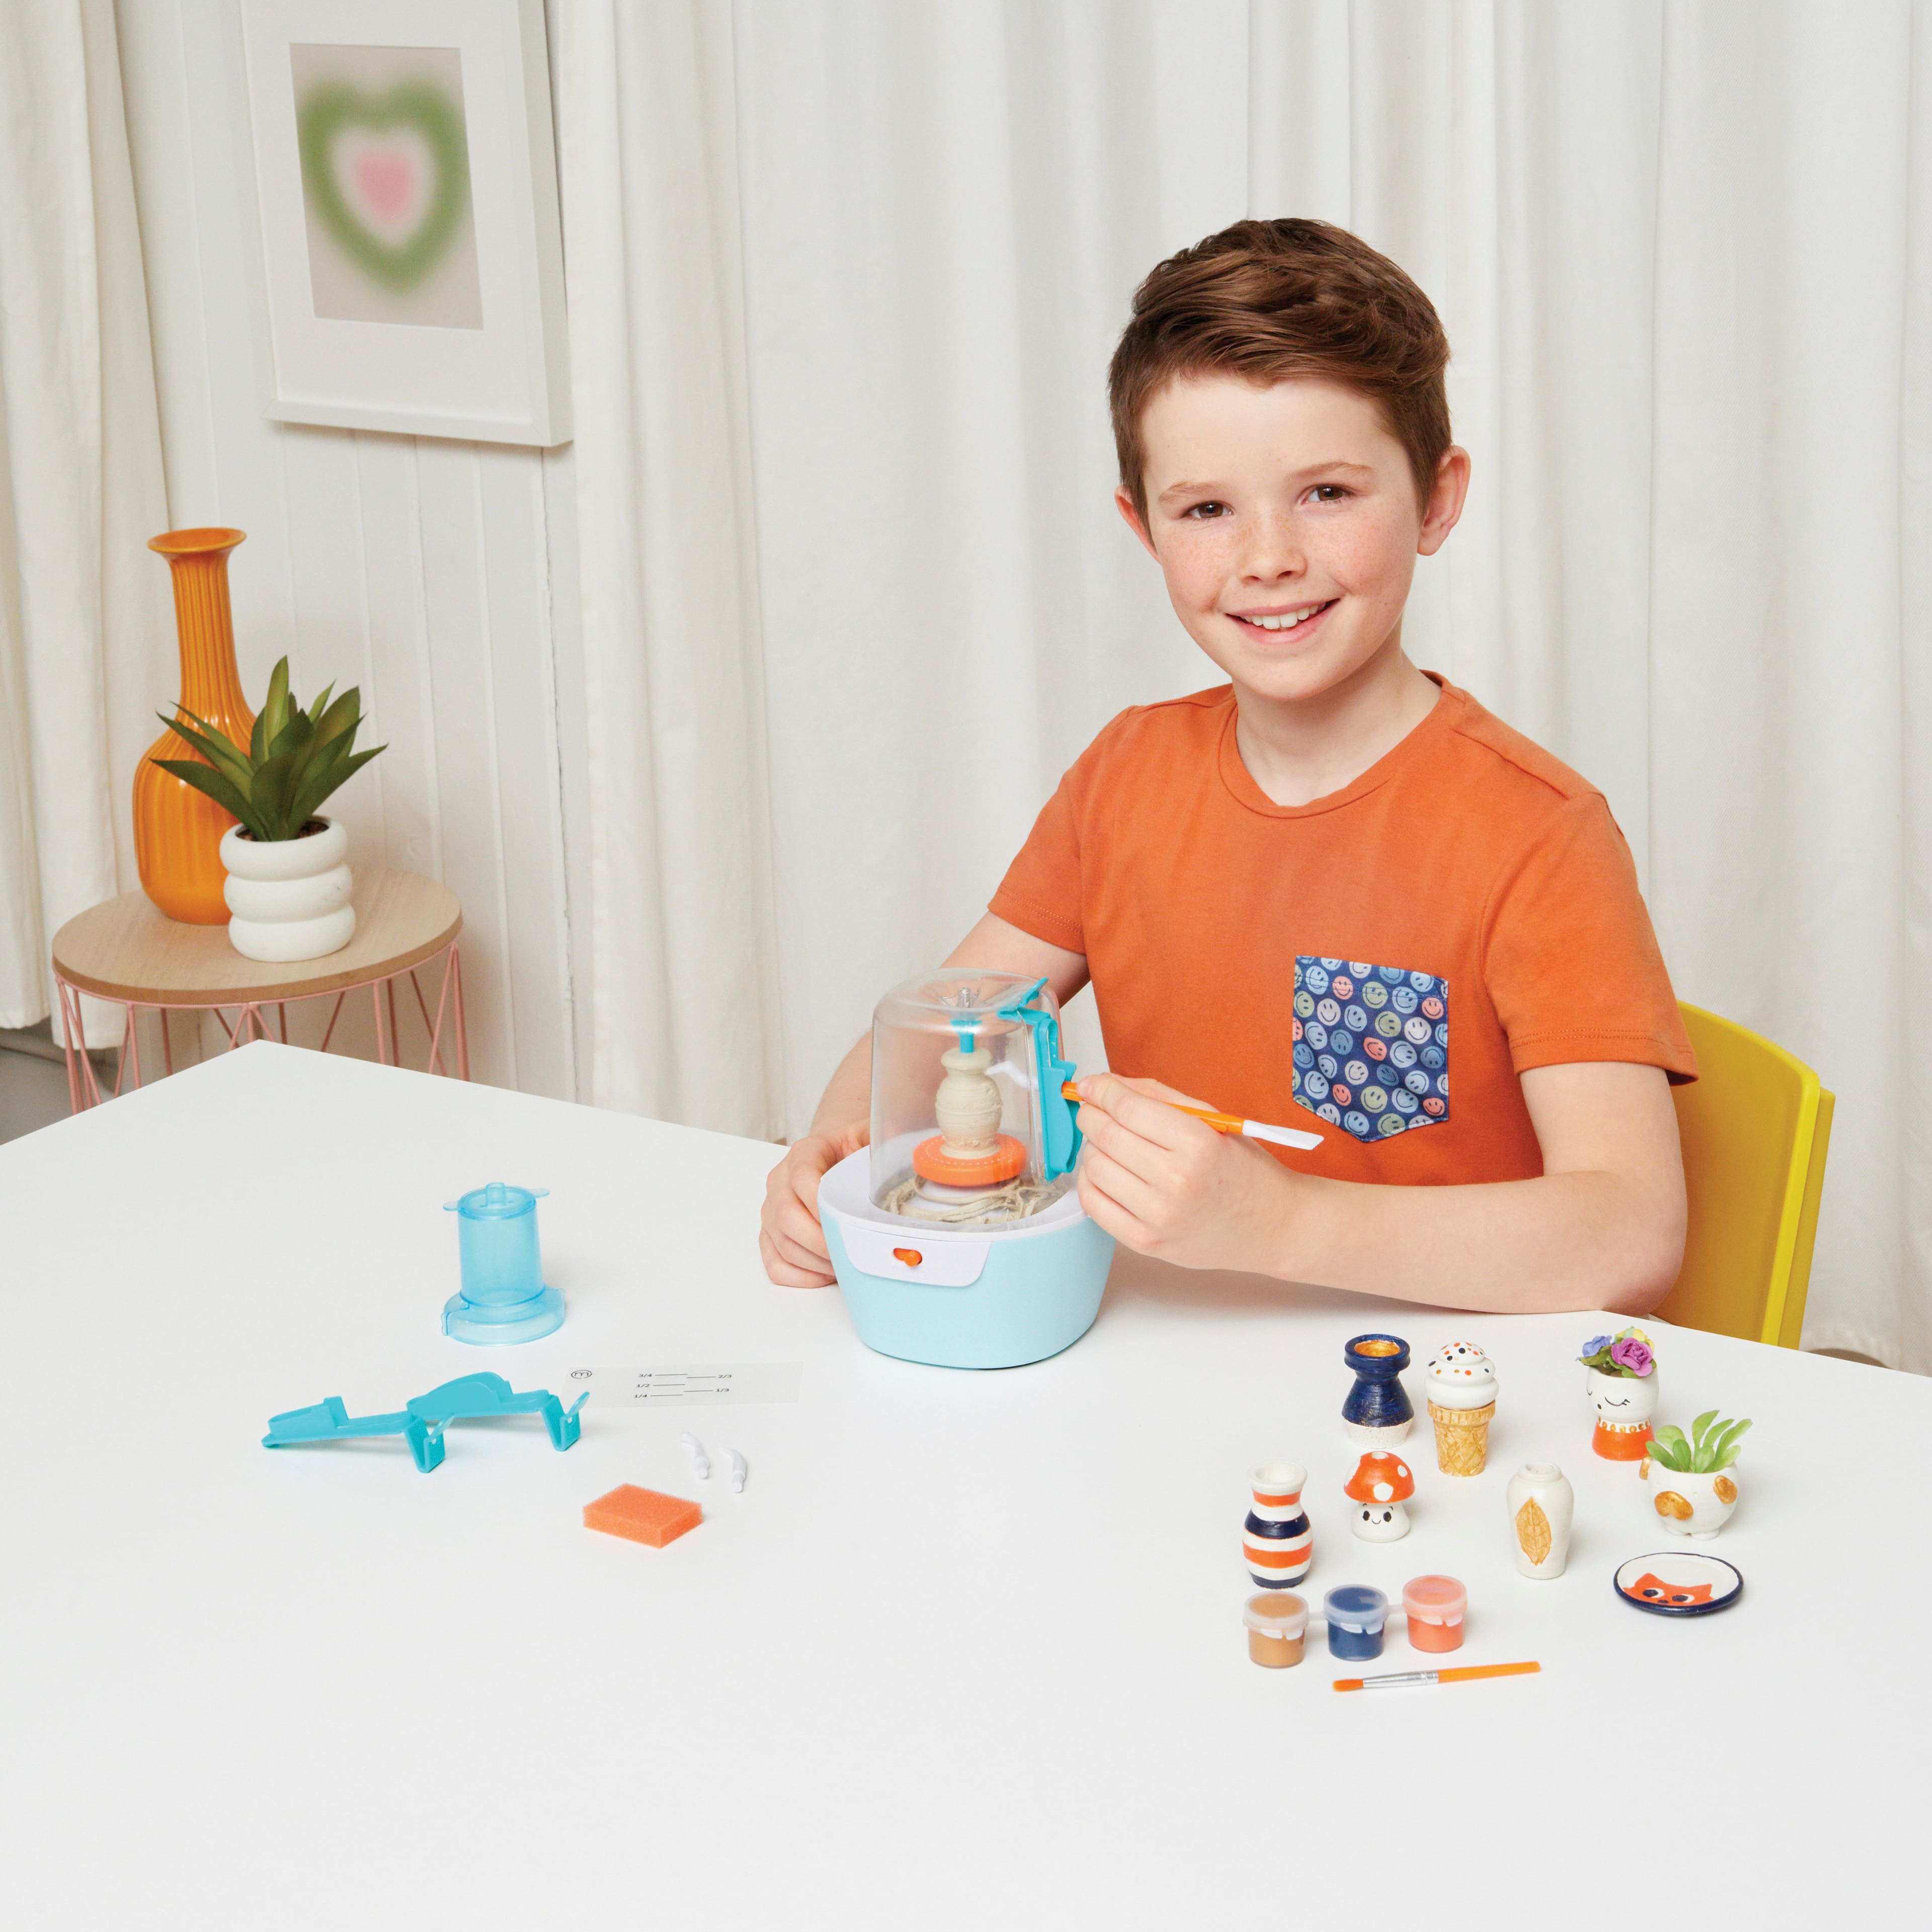 Make It Real: Mini Pottery Studio For Kids-26 Pieces . 10 Projects